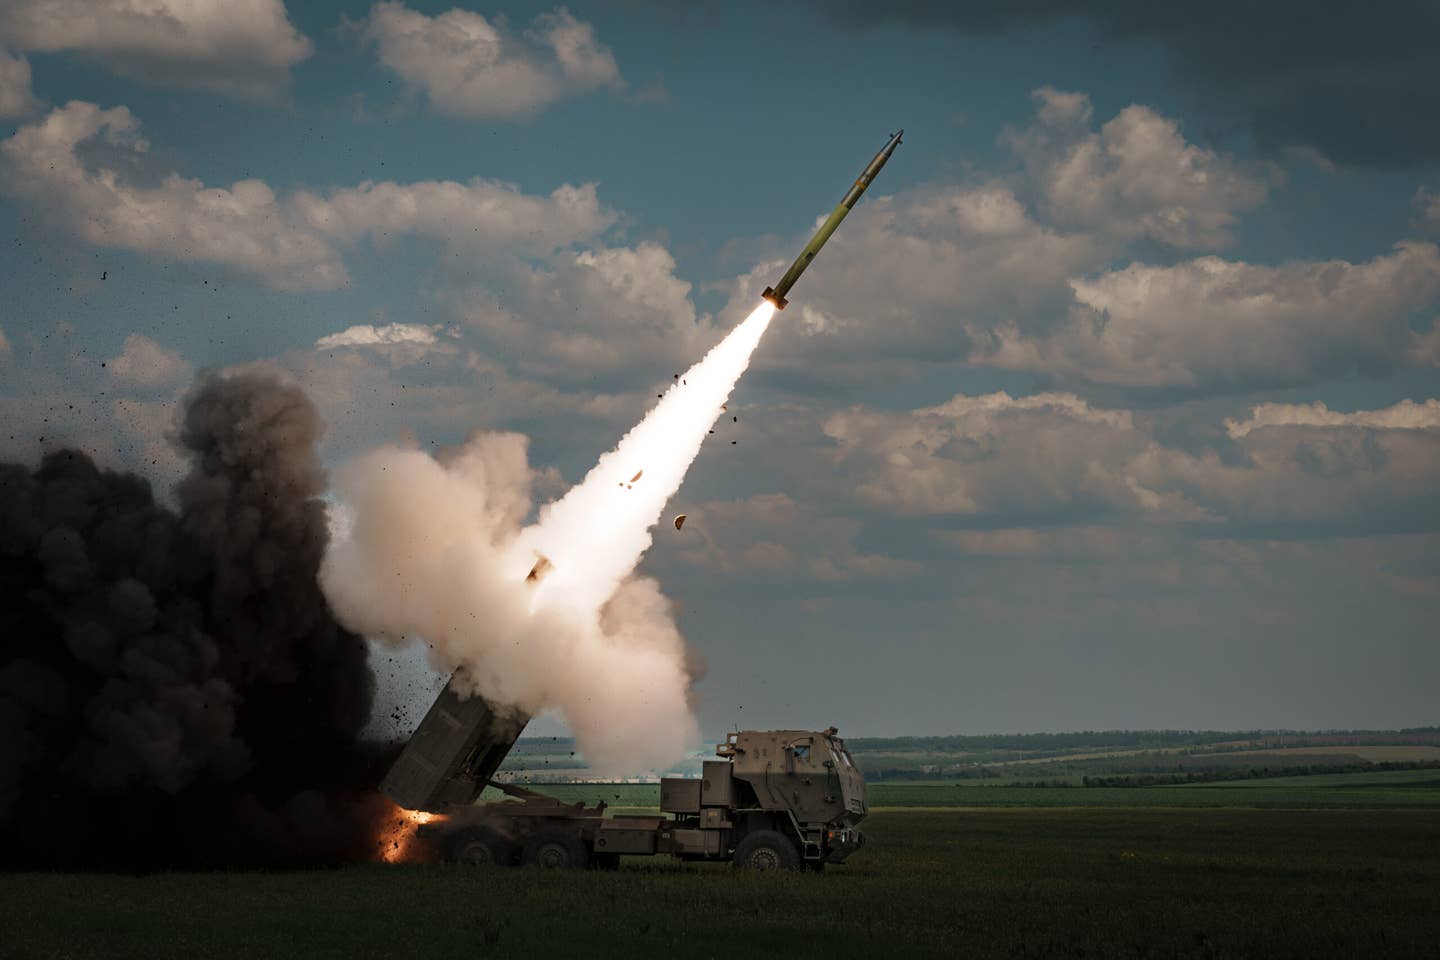 Guided Multiple Launch Rocket System munitions, like the one launched by this M142 HIMARS in service with Ukraine, cost more than twice as much as the one contained in a Ground Launched Small Diameter Bomb. (Photo by Serhii Mykhalchuk/Global Images Ukraine via Getty Images)